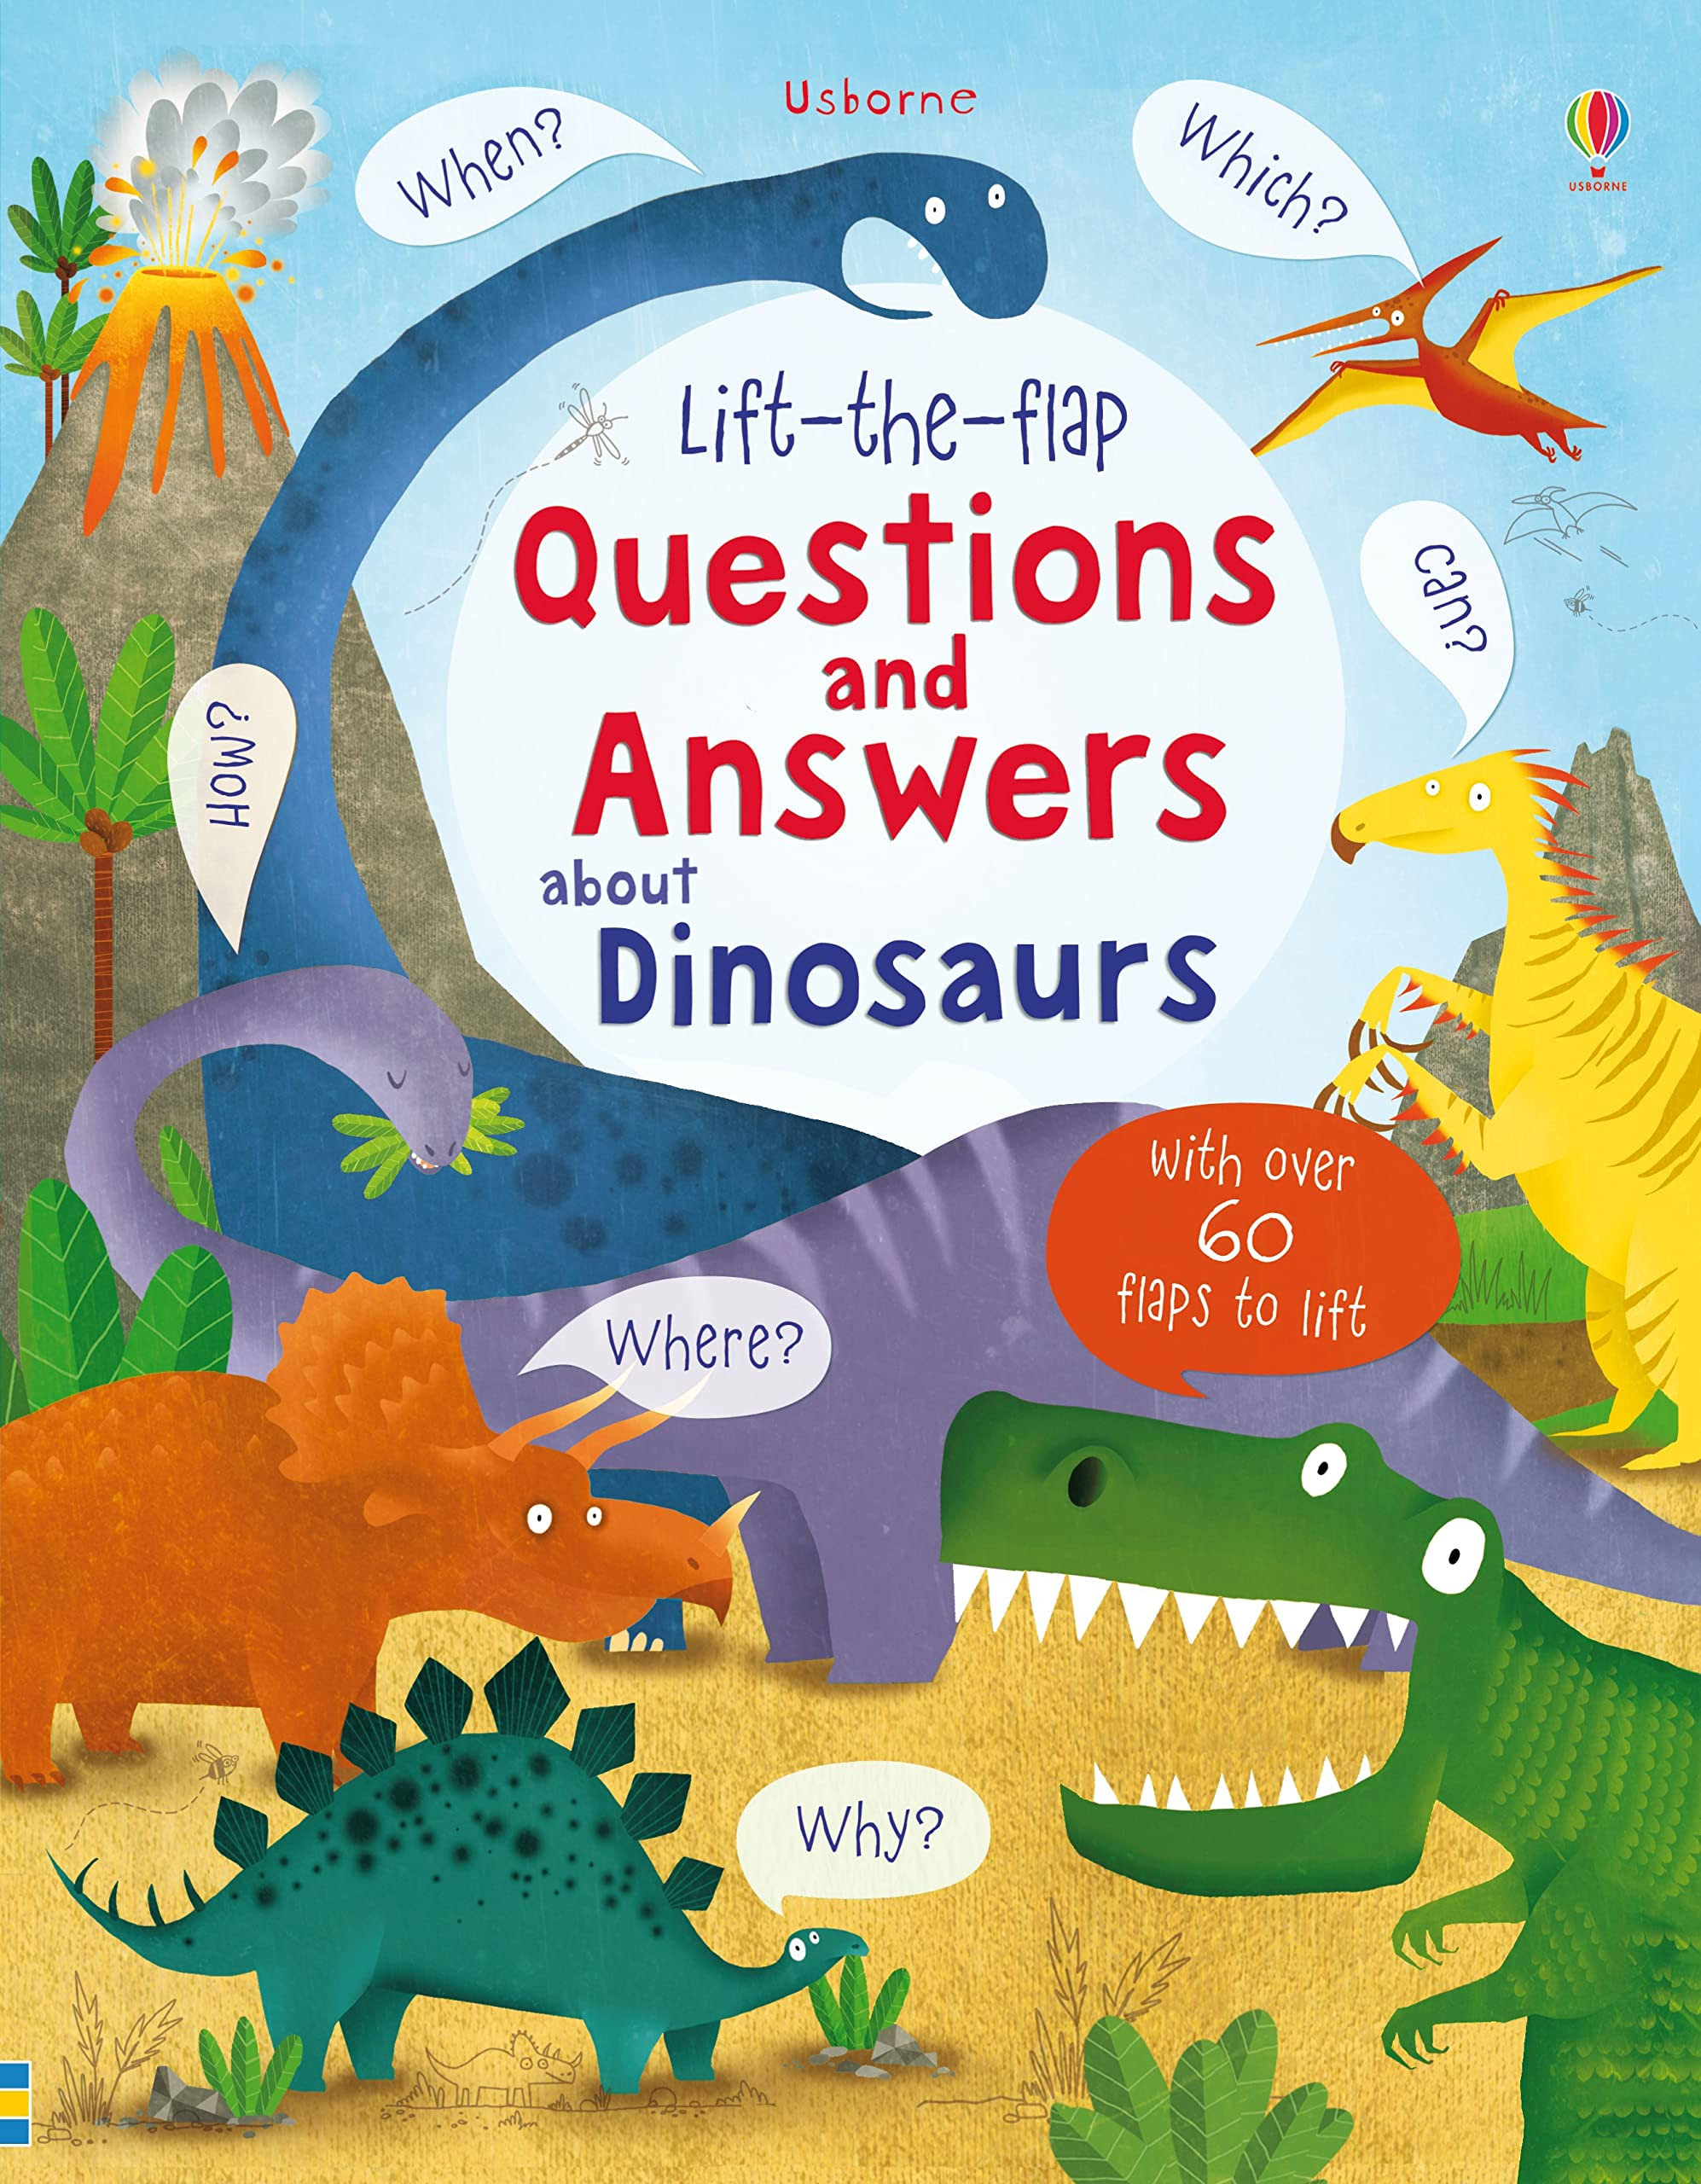 Lift-the-flap Questions & Answers About Dinosaurs